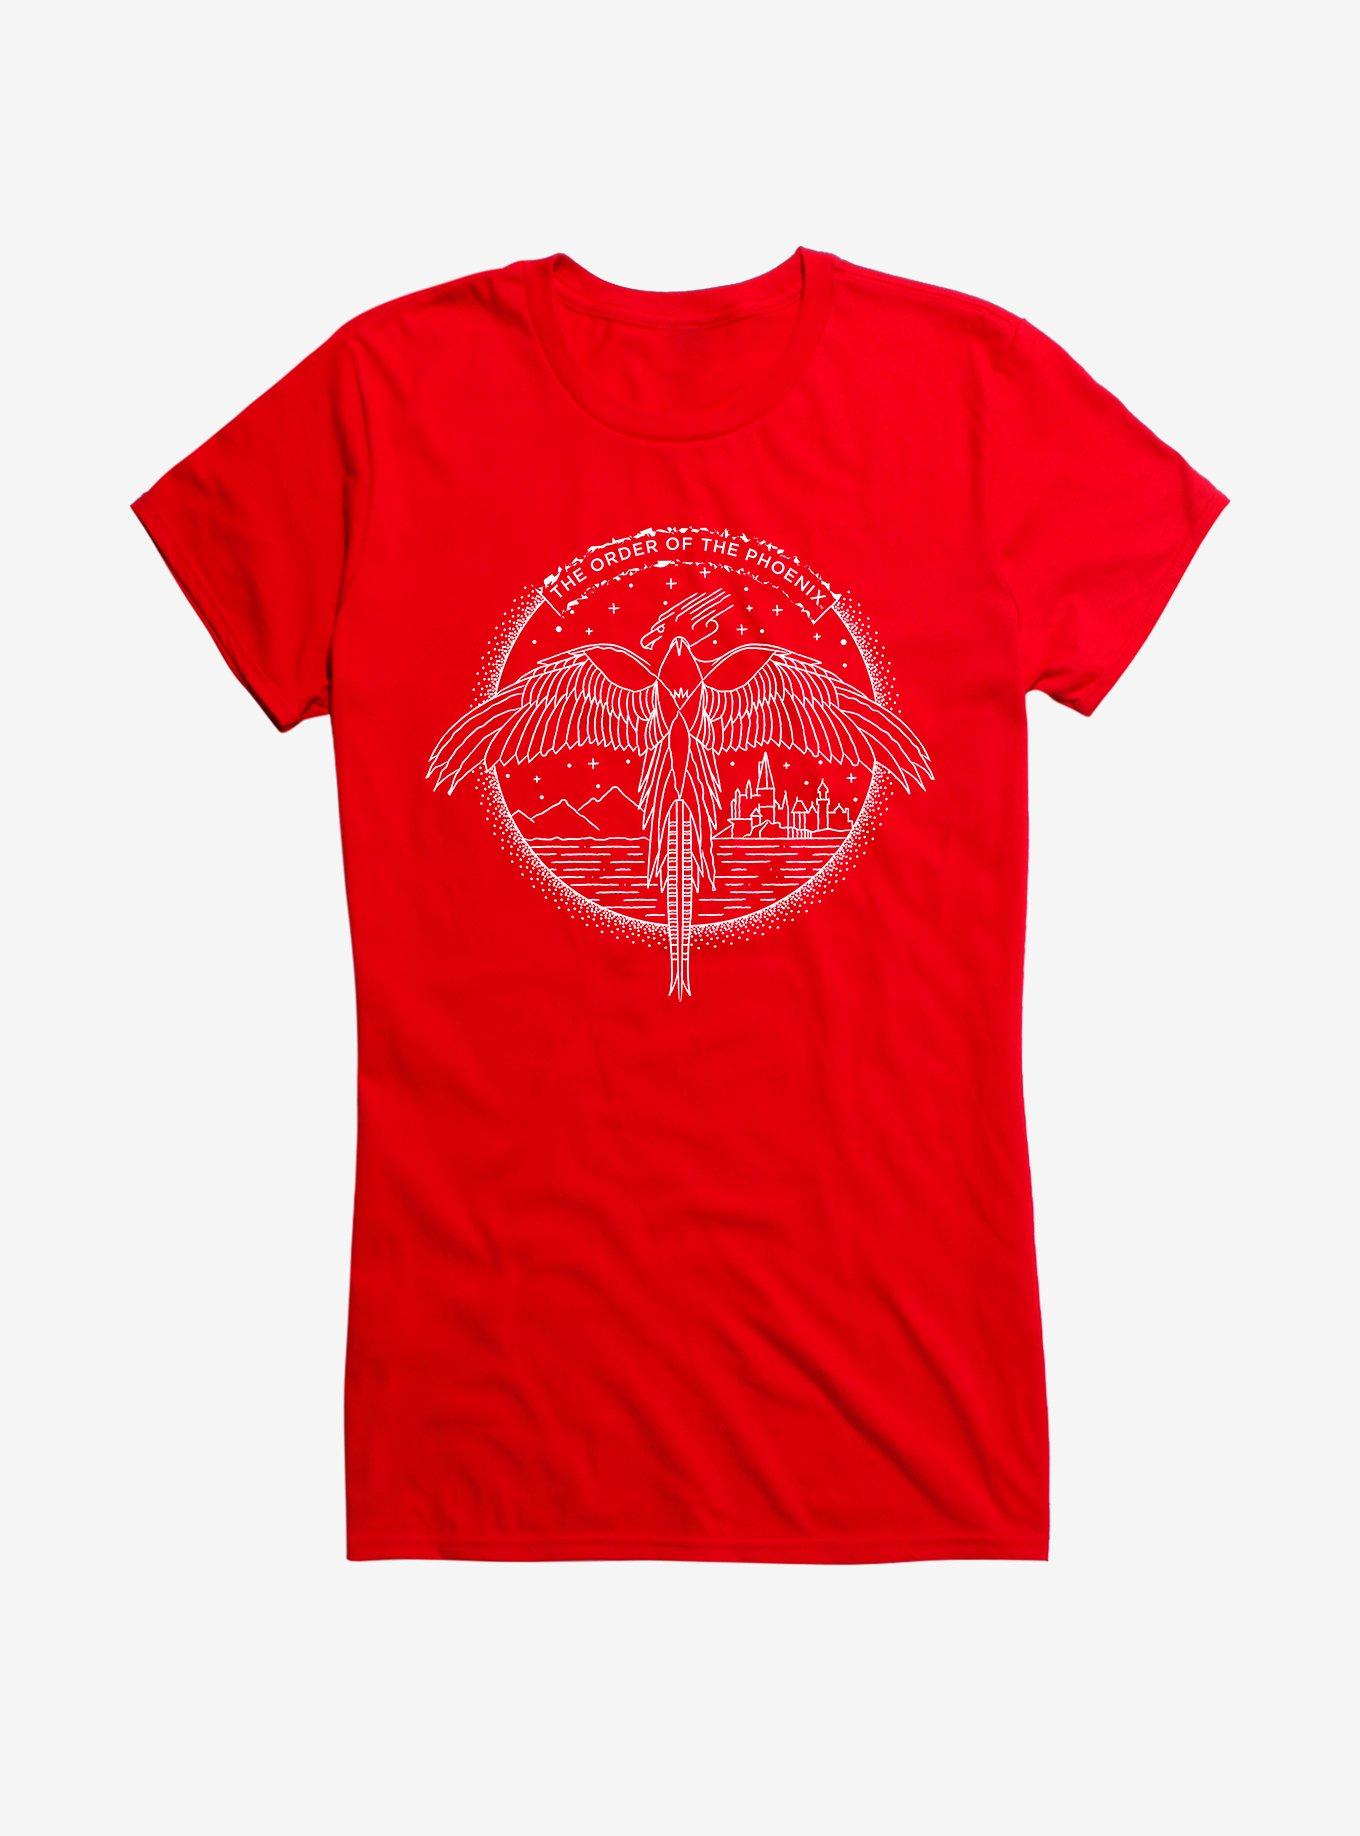 Harry Potter The Order of The Phoenix Girls T-Shirt, RED, hi-res